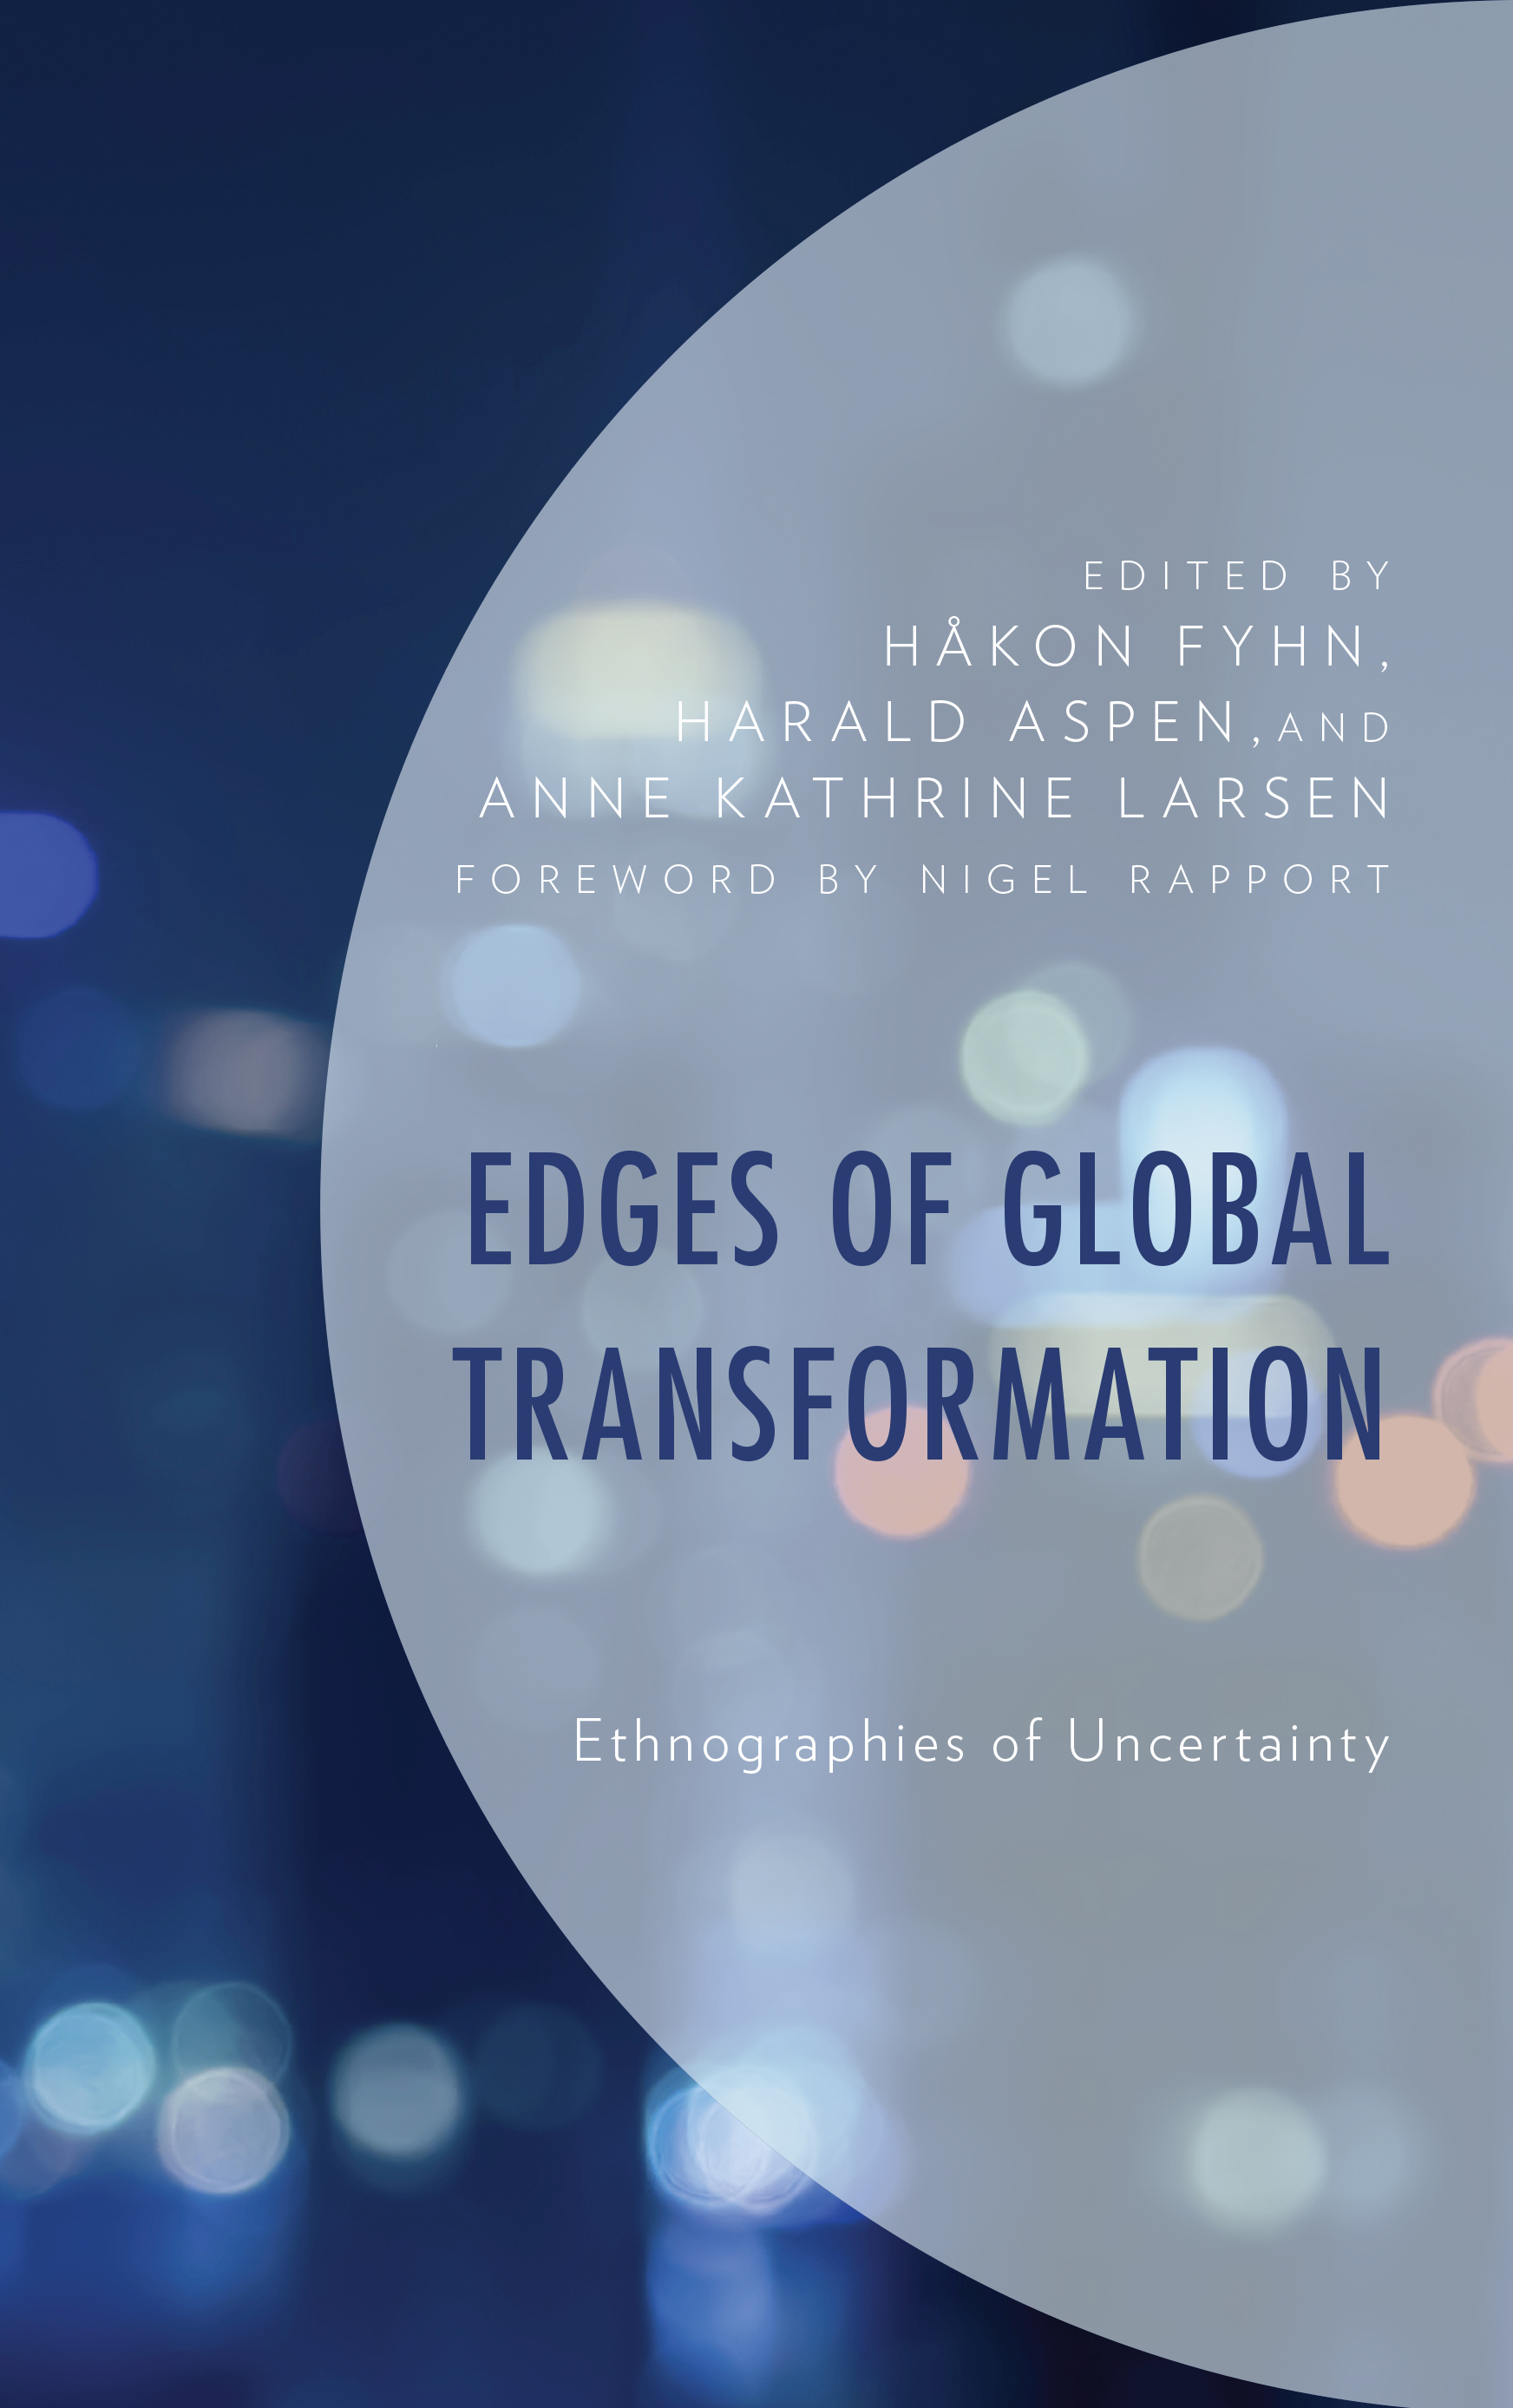 Edges of Global Transformation: Ethnographies of Uncertainty